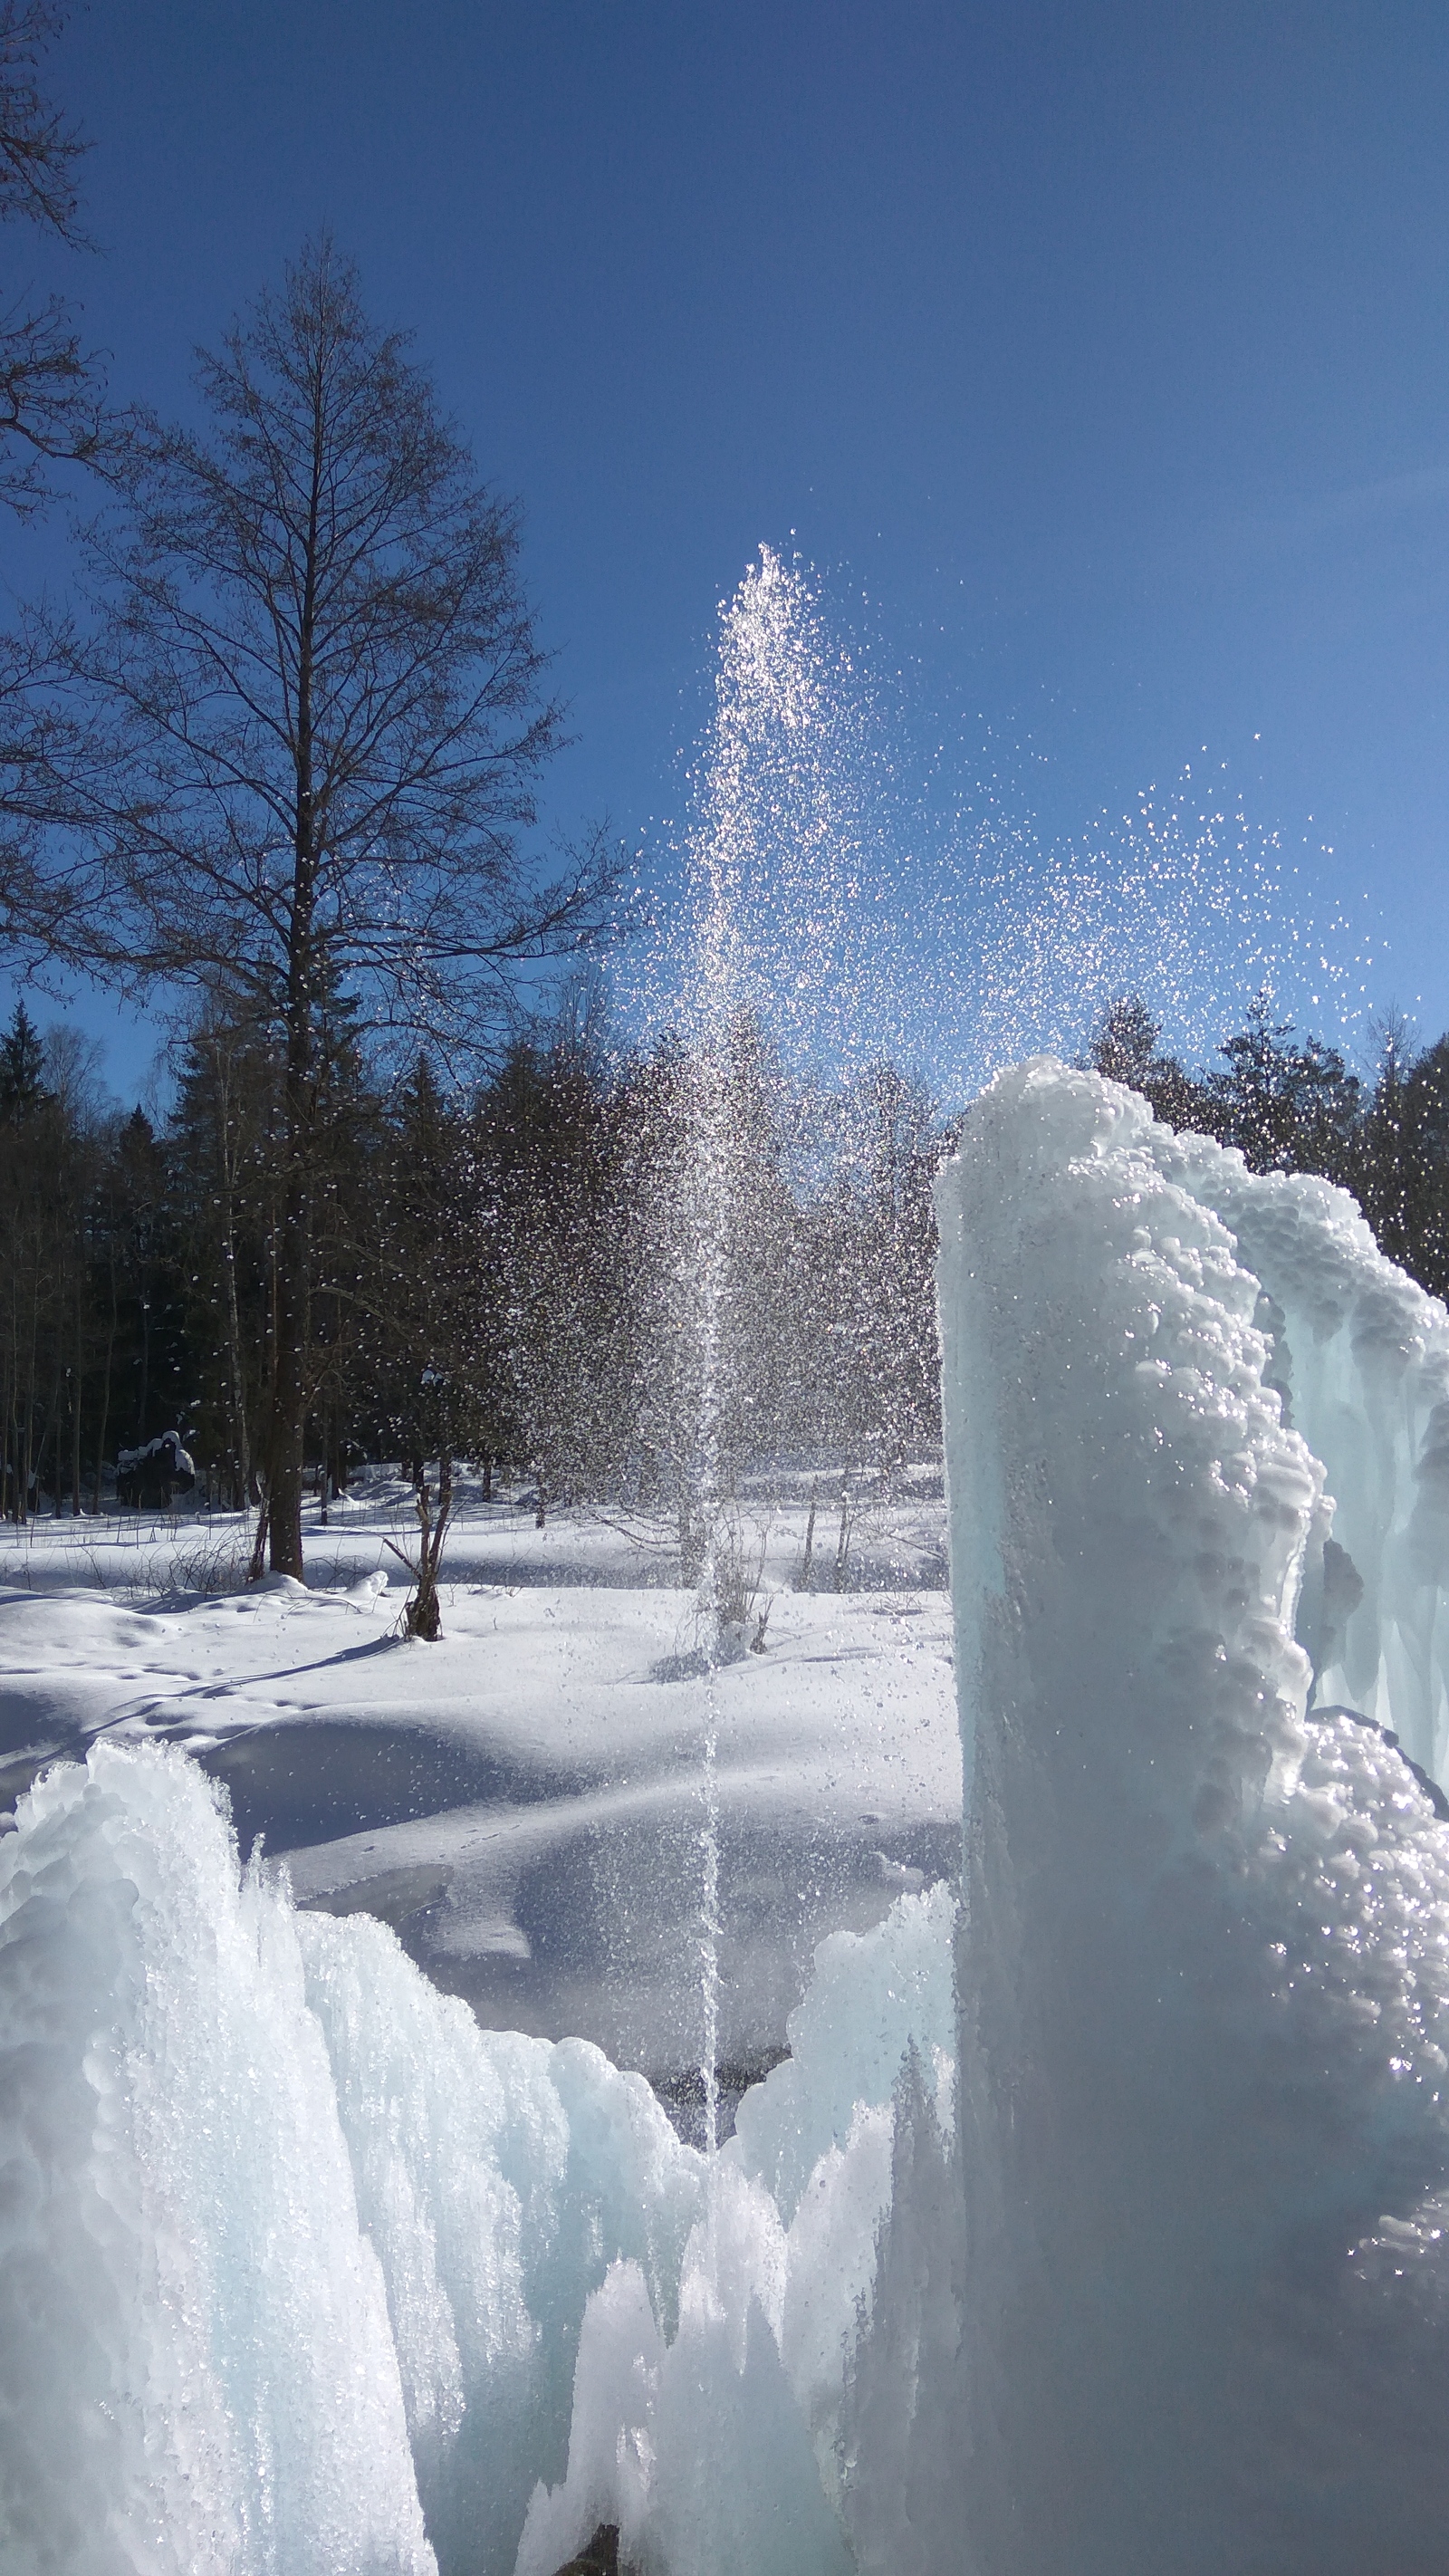 Natural fountain in winter - My, Fountain, Natural phenomena, Nature, sights, Vladimir, Text